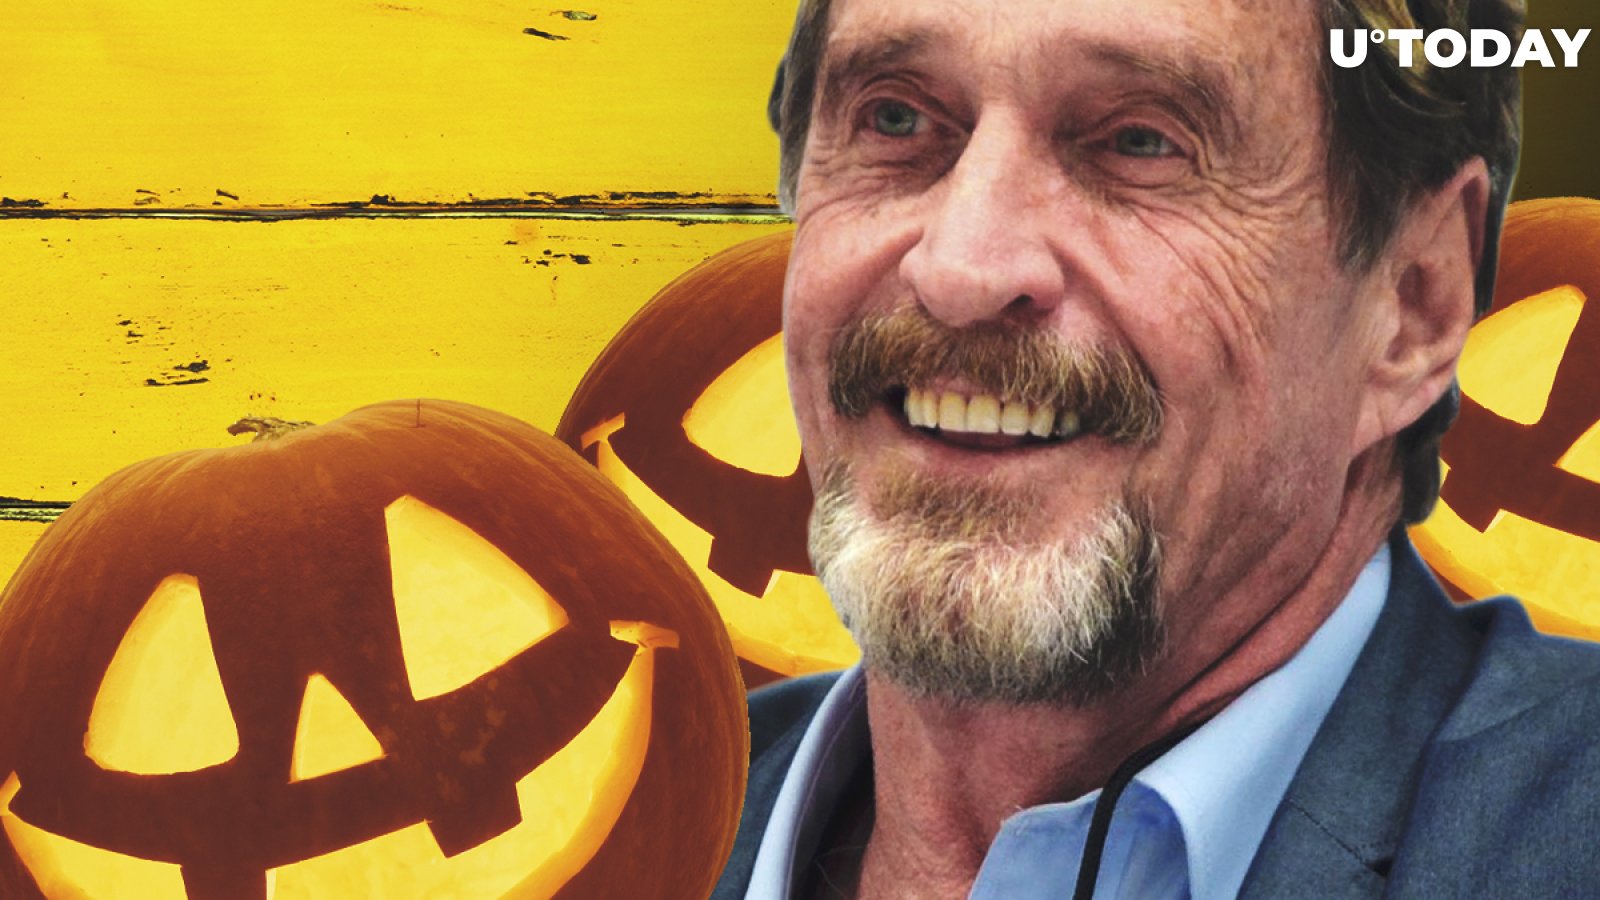 Updated: China Zombie Creators Thank John McAfee for Taking Part in Their Social Experiment  